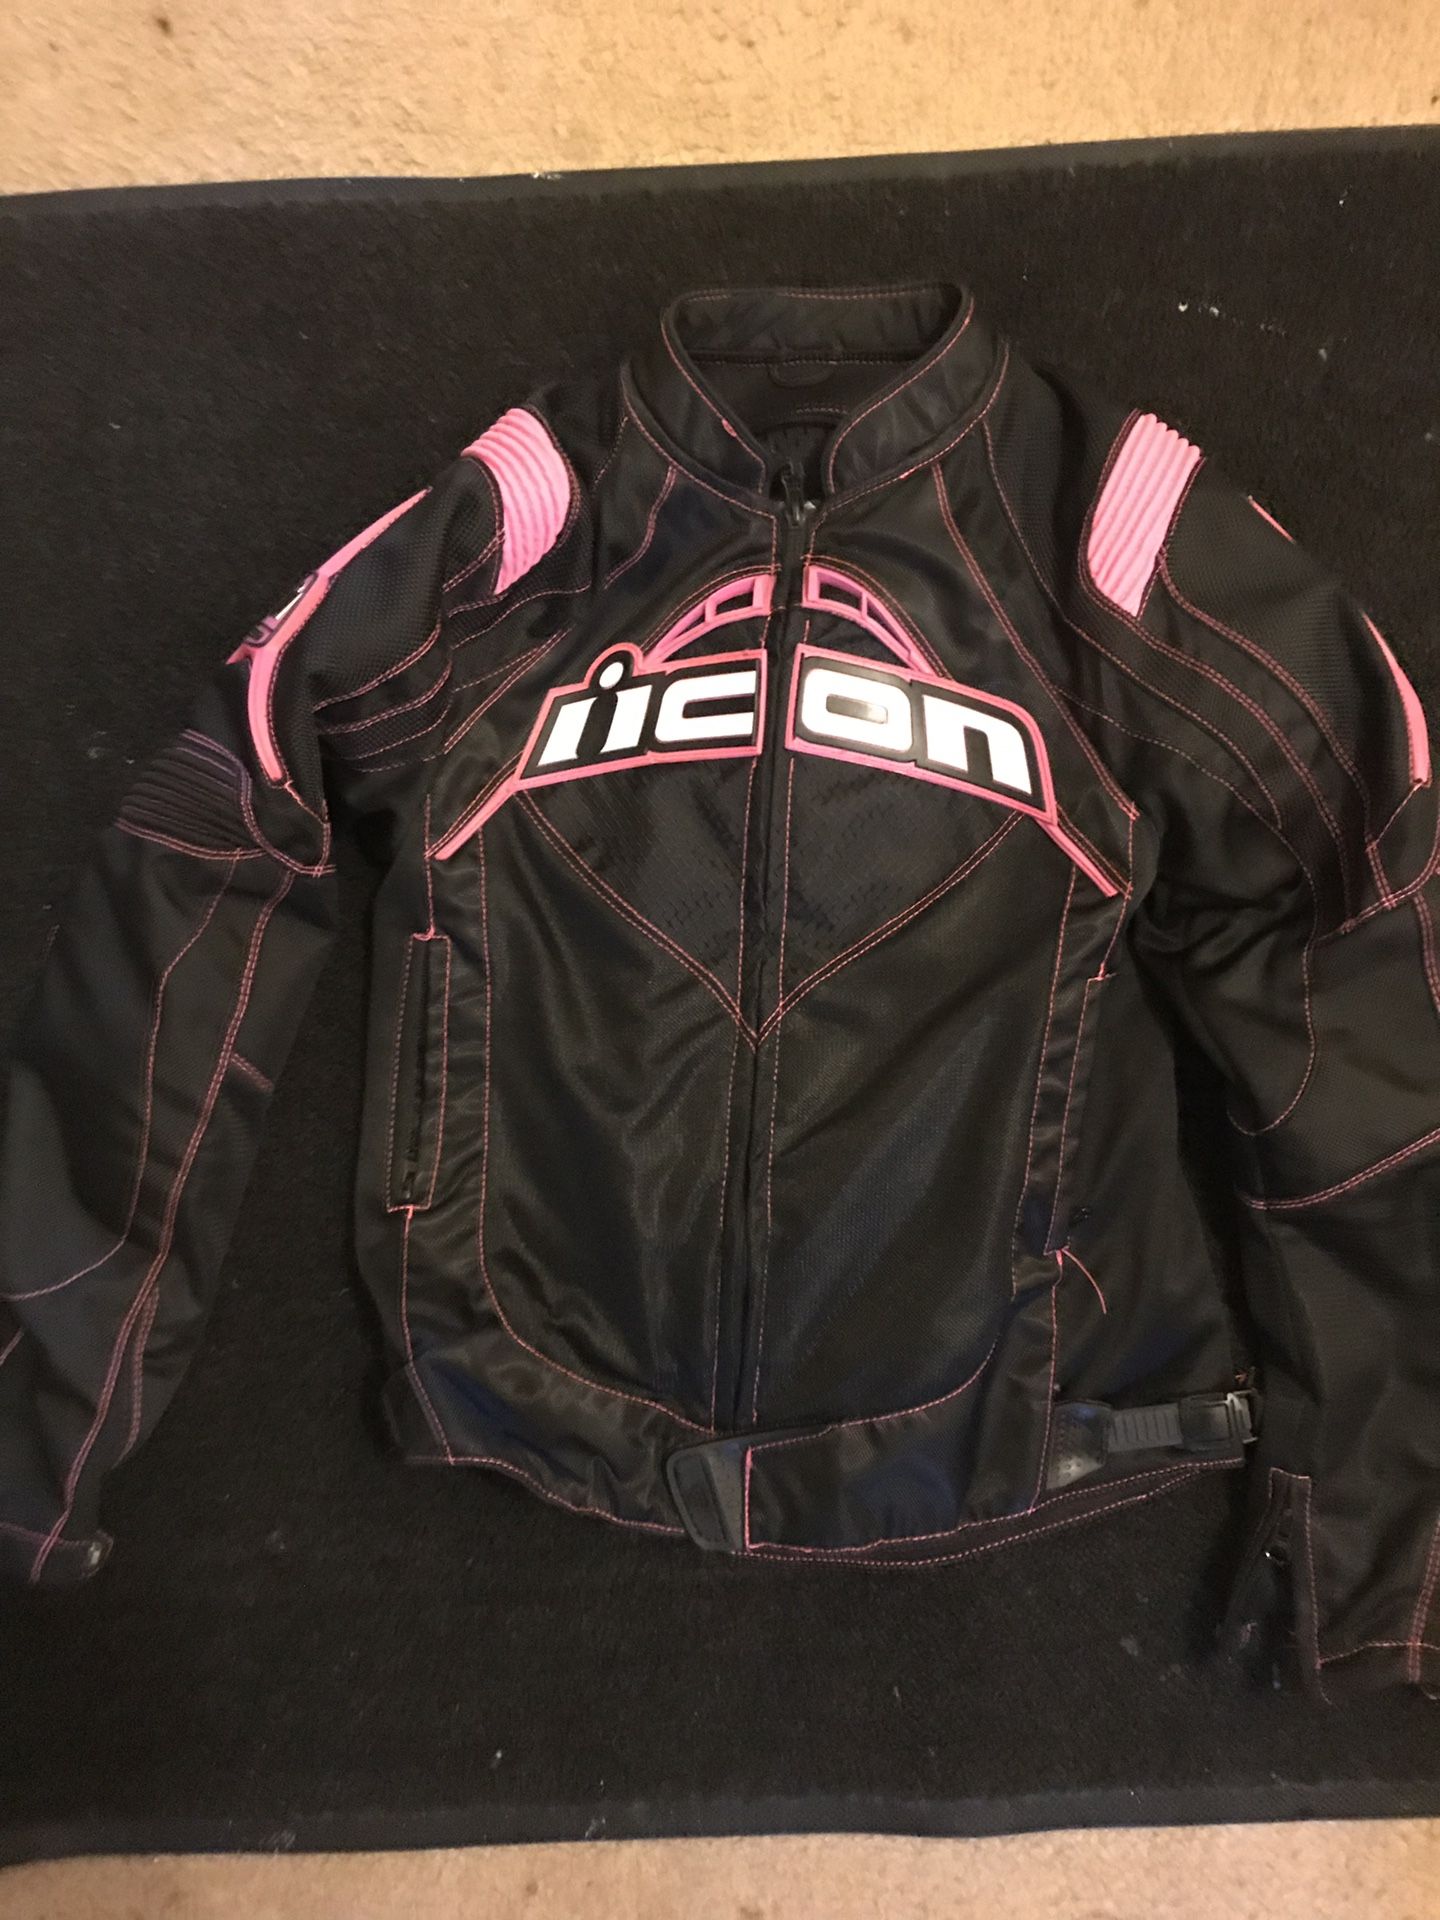 Women’s motorcycle jacket size small